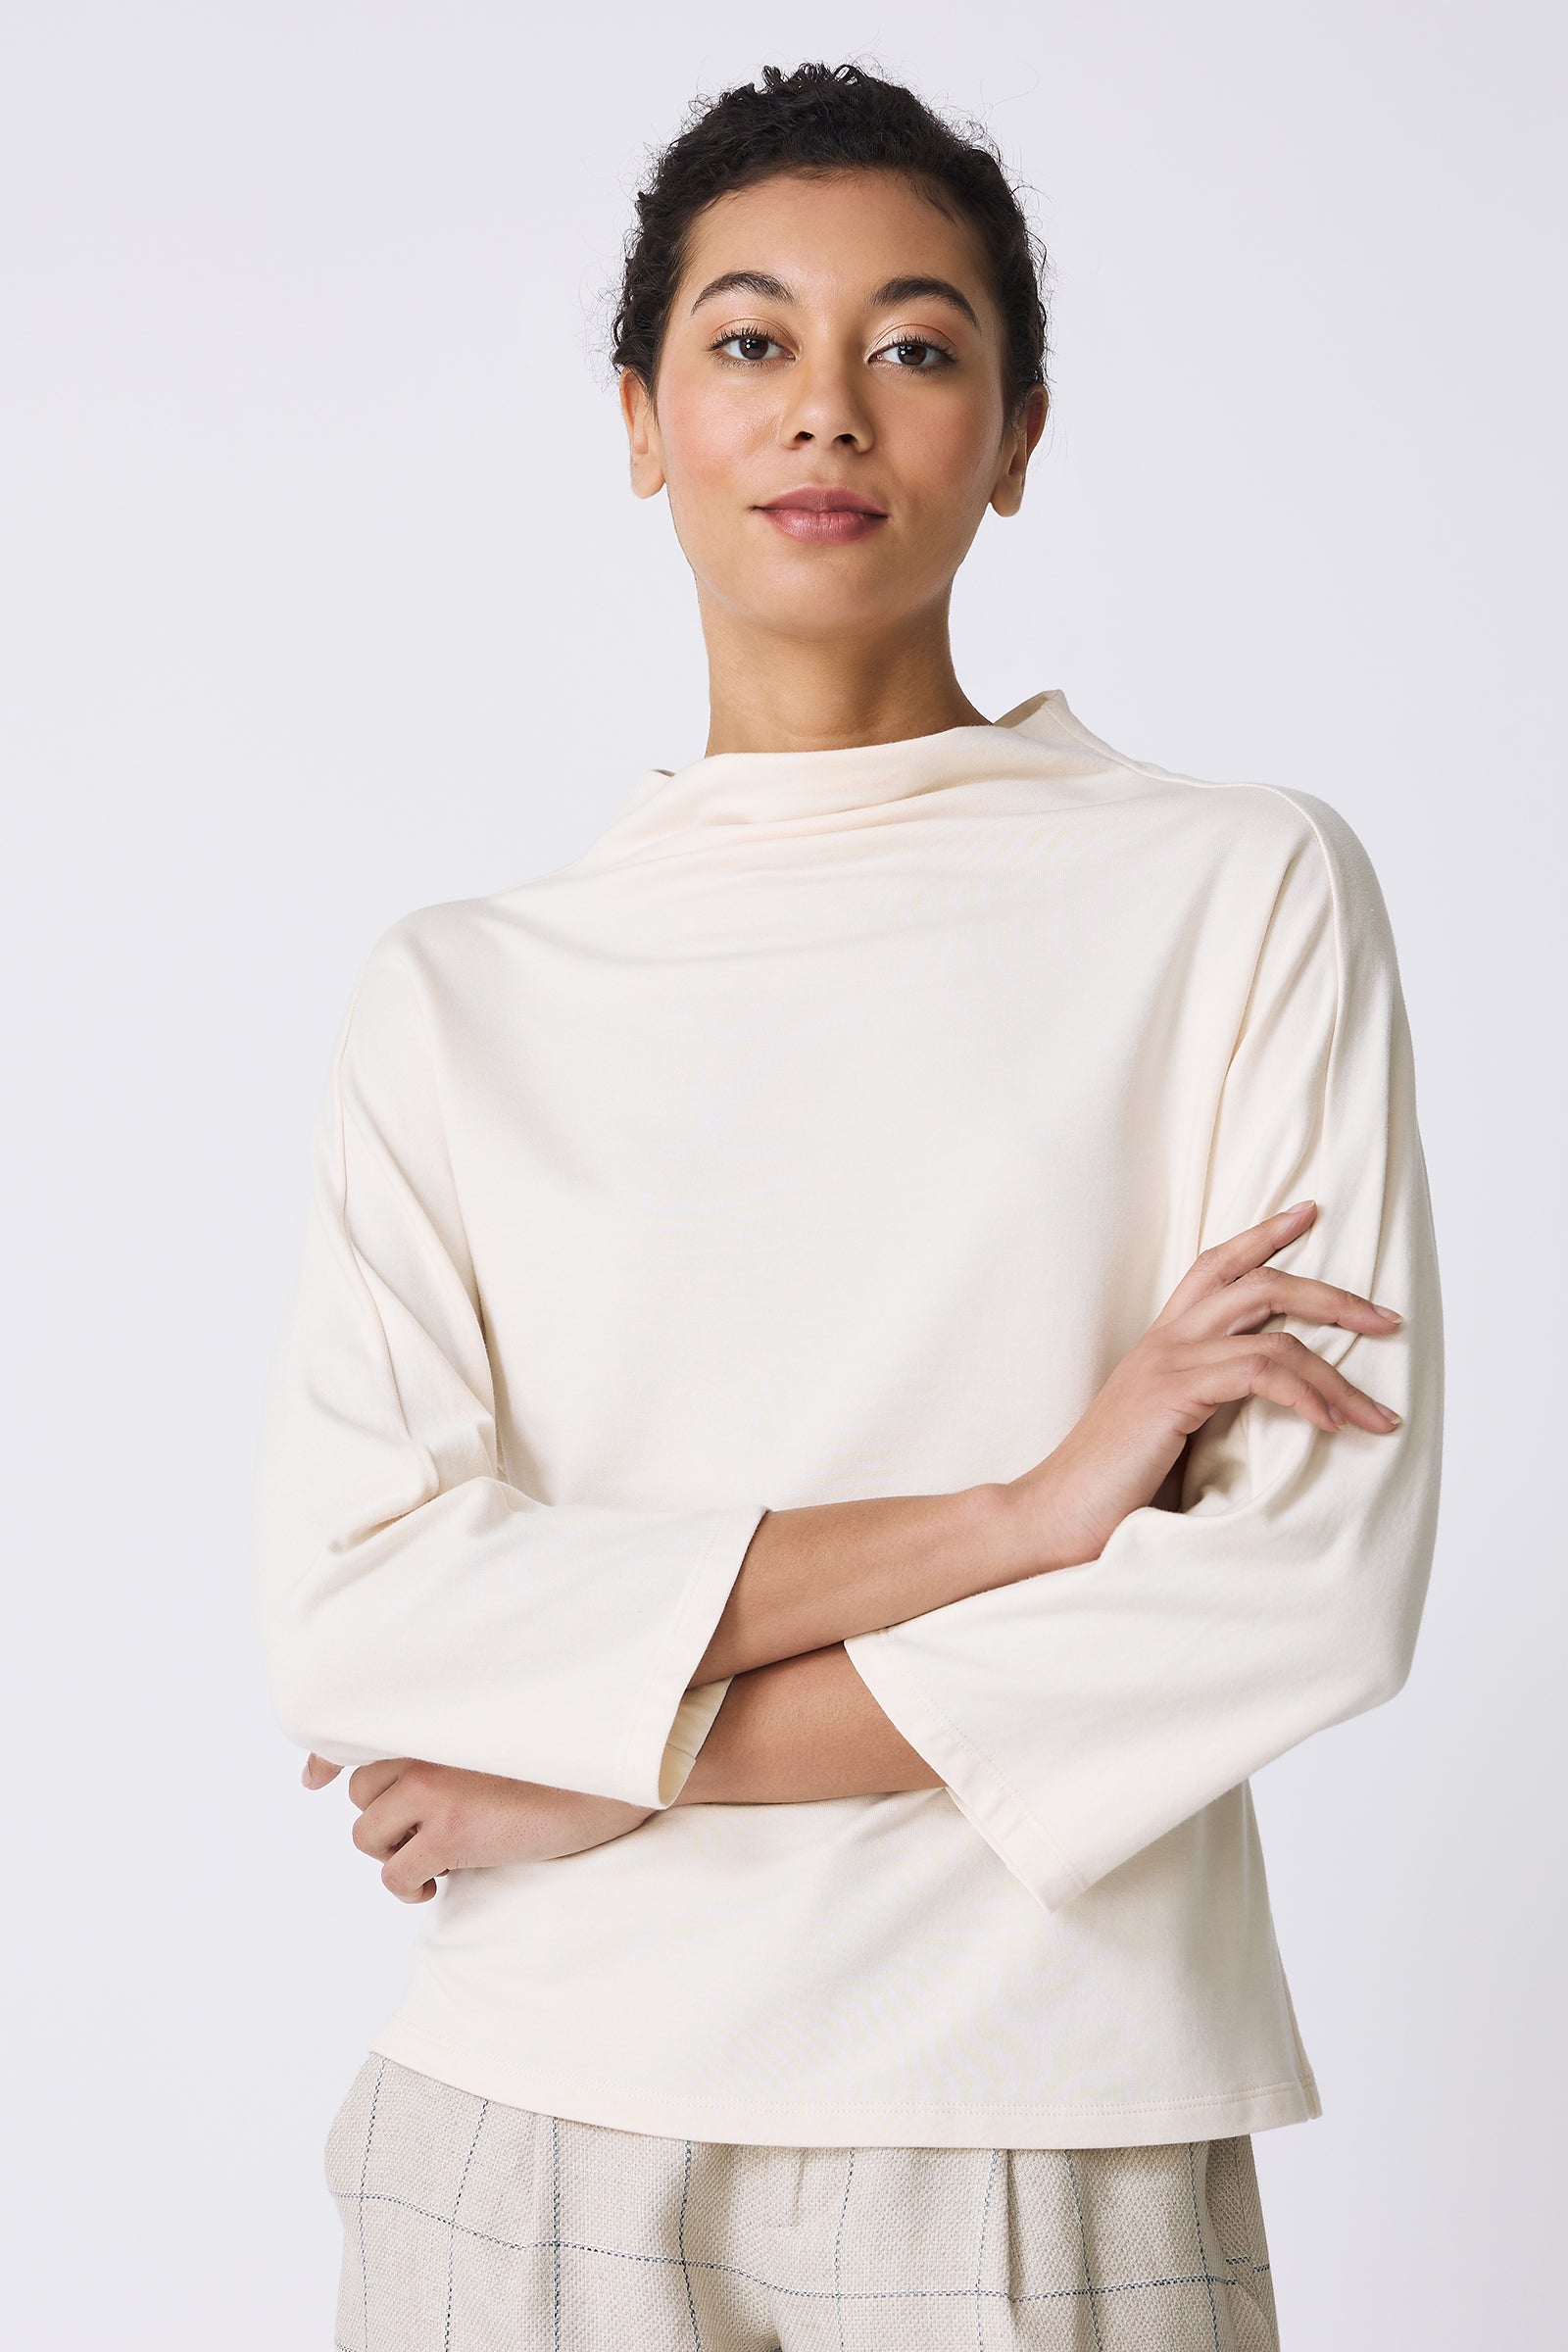 Kal Rieman Brigitte Mock Funnel Top in Ivory on model with arms crossed front view